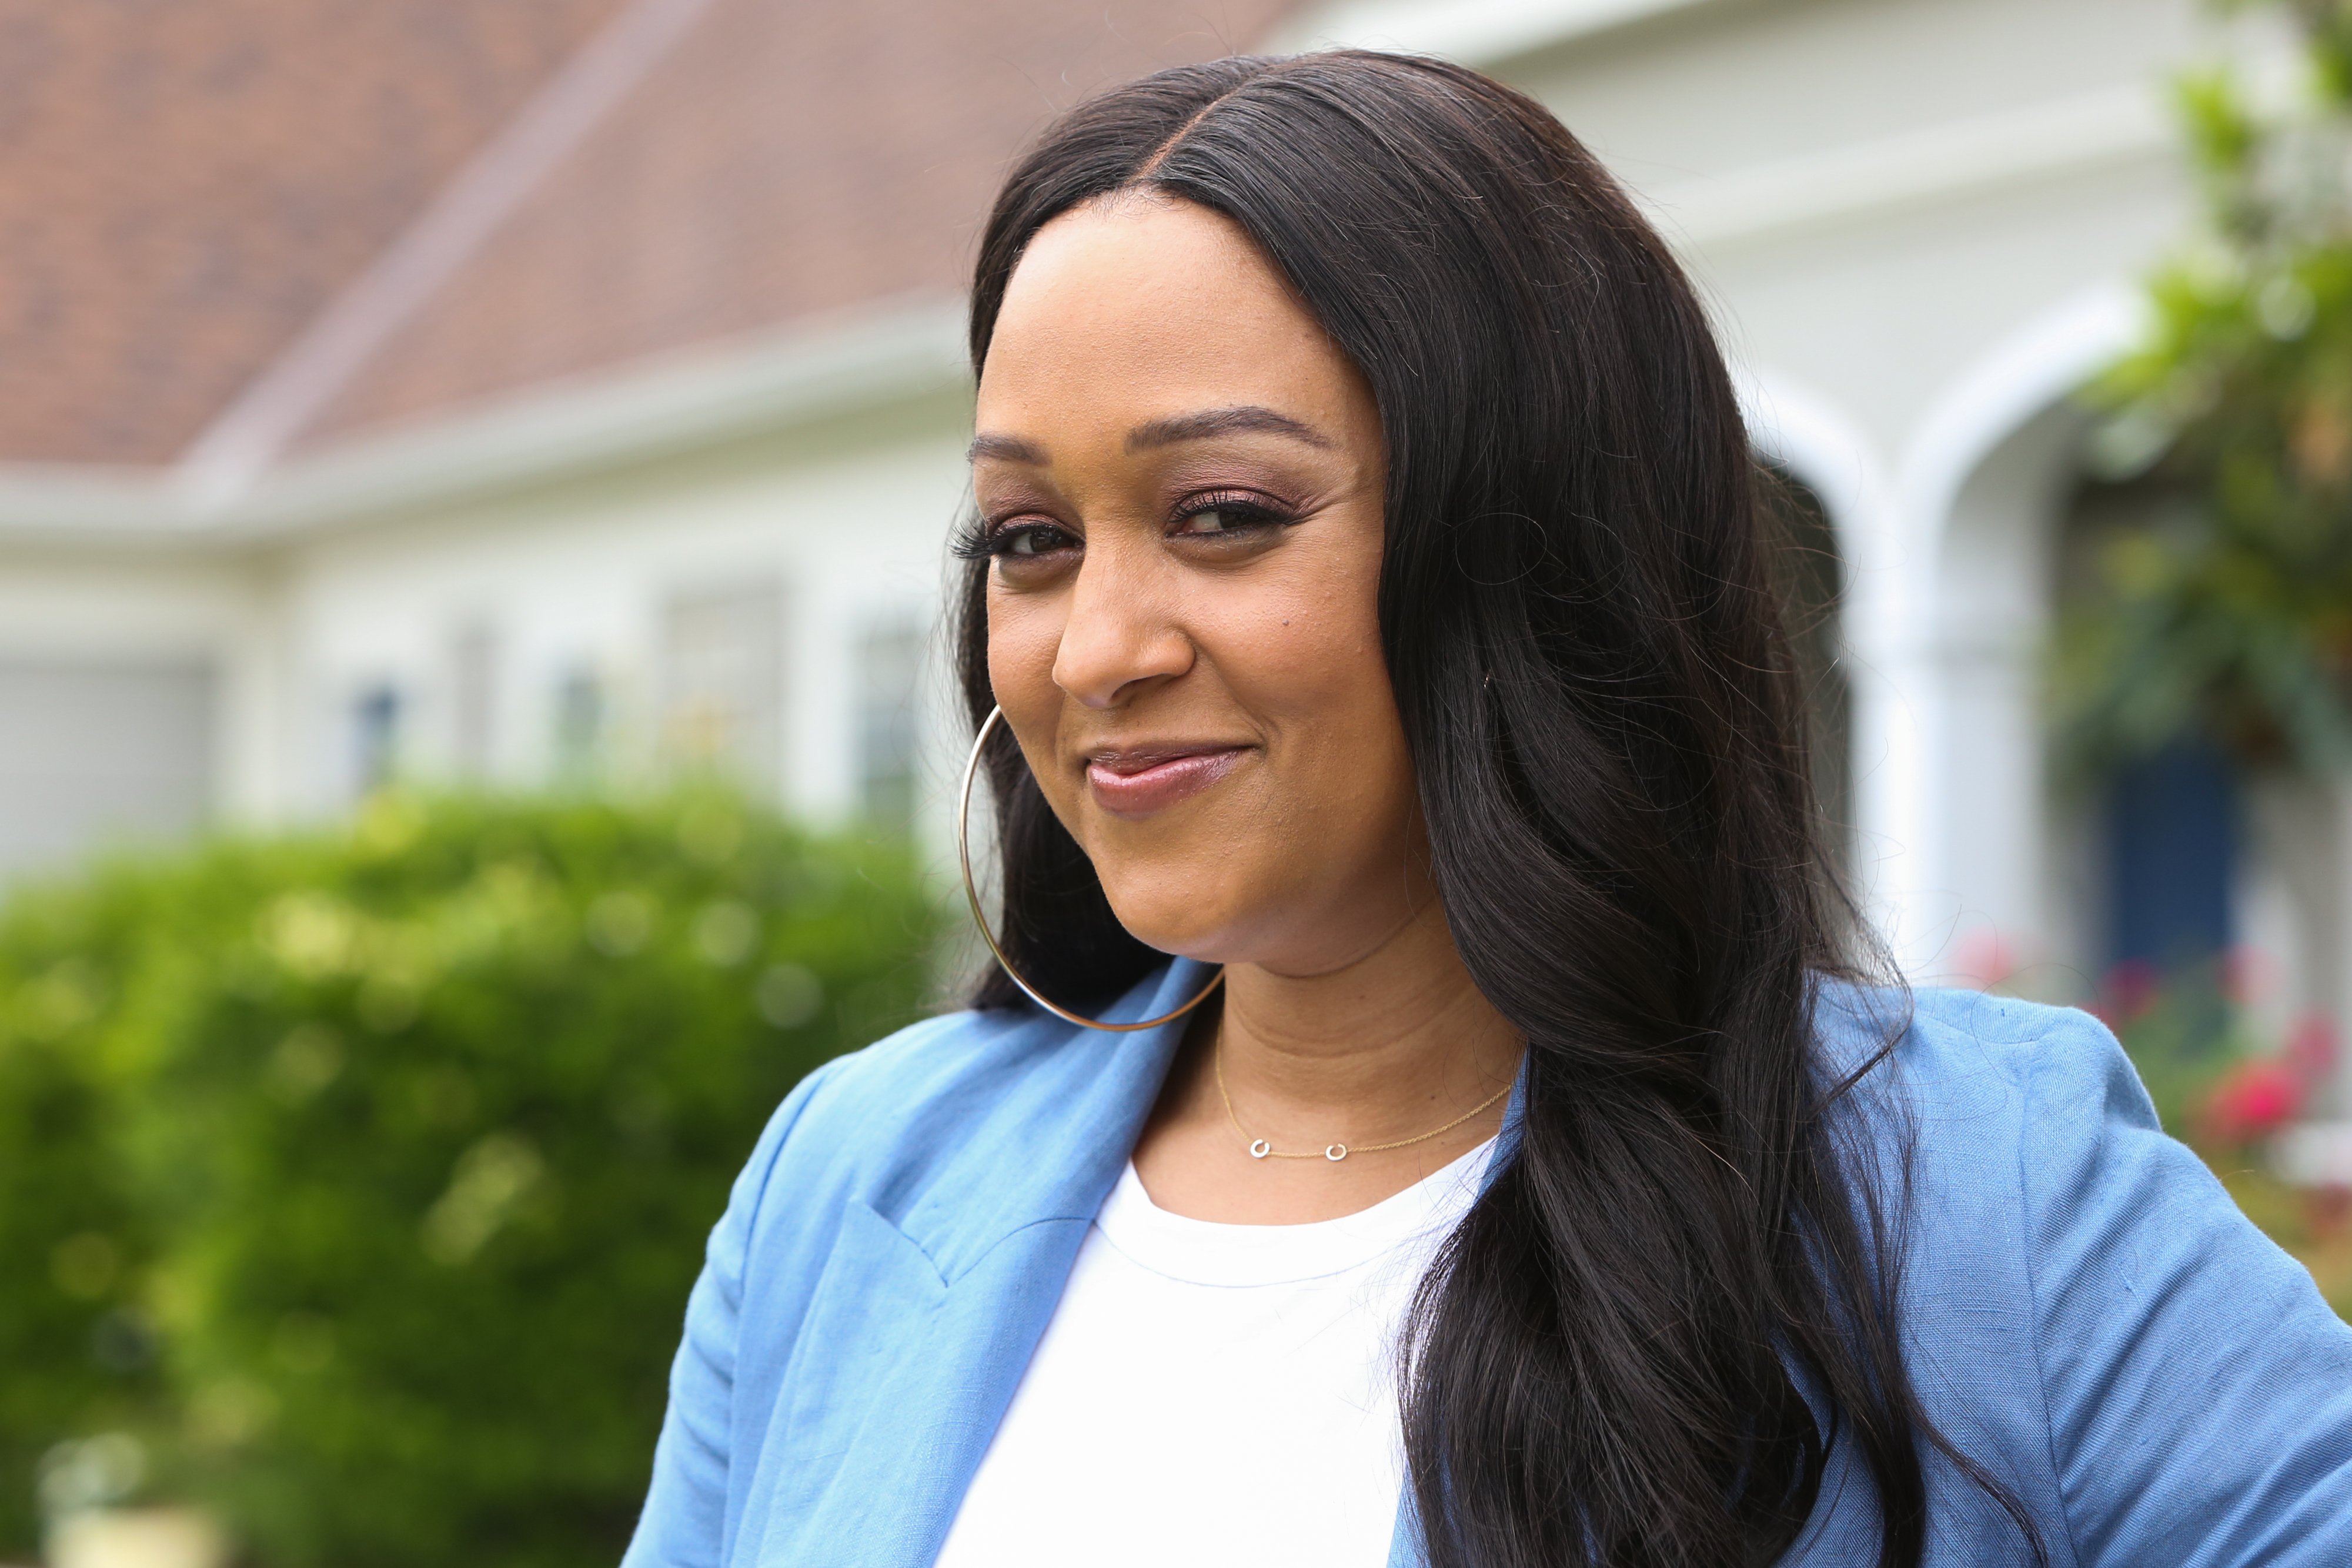 Tia Mowry at Hallmark's "Home & Family" at Universal Studios Hollywood on May 13, 2019 in Universal City, California.| Source: Getty Images